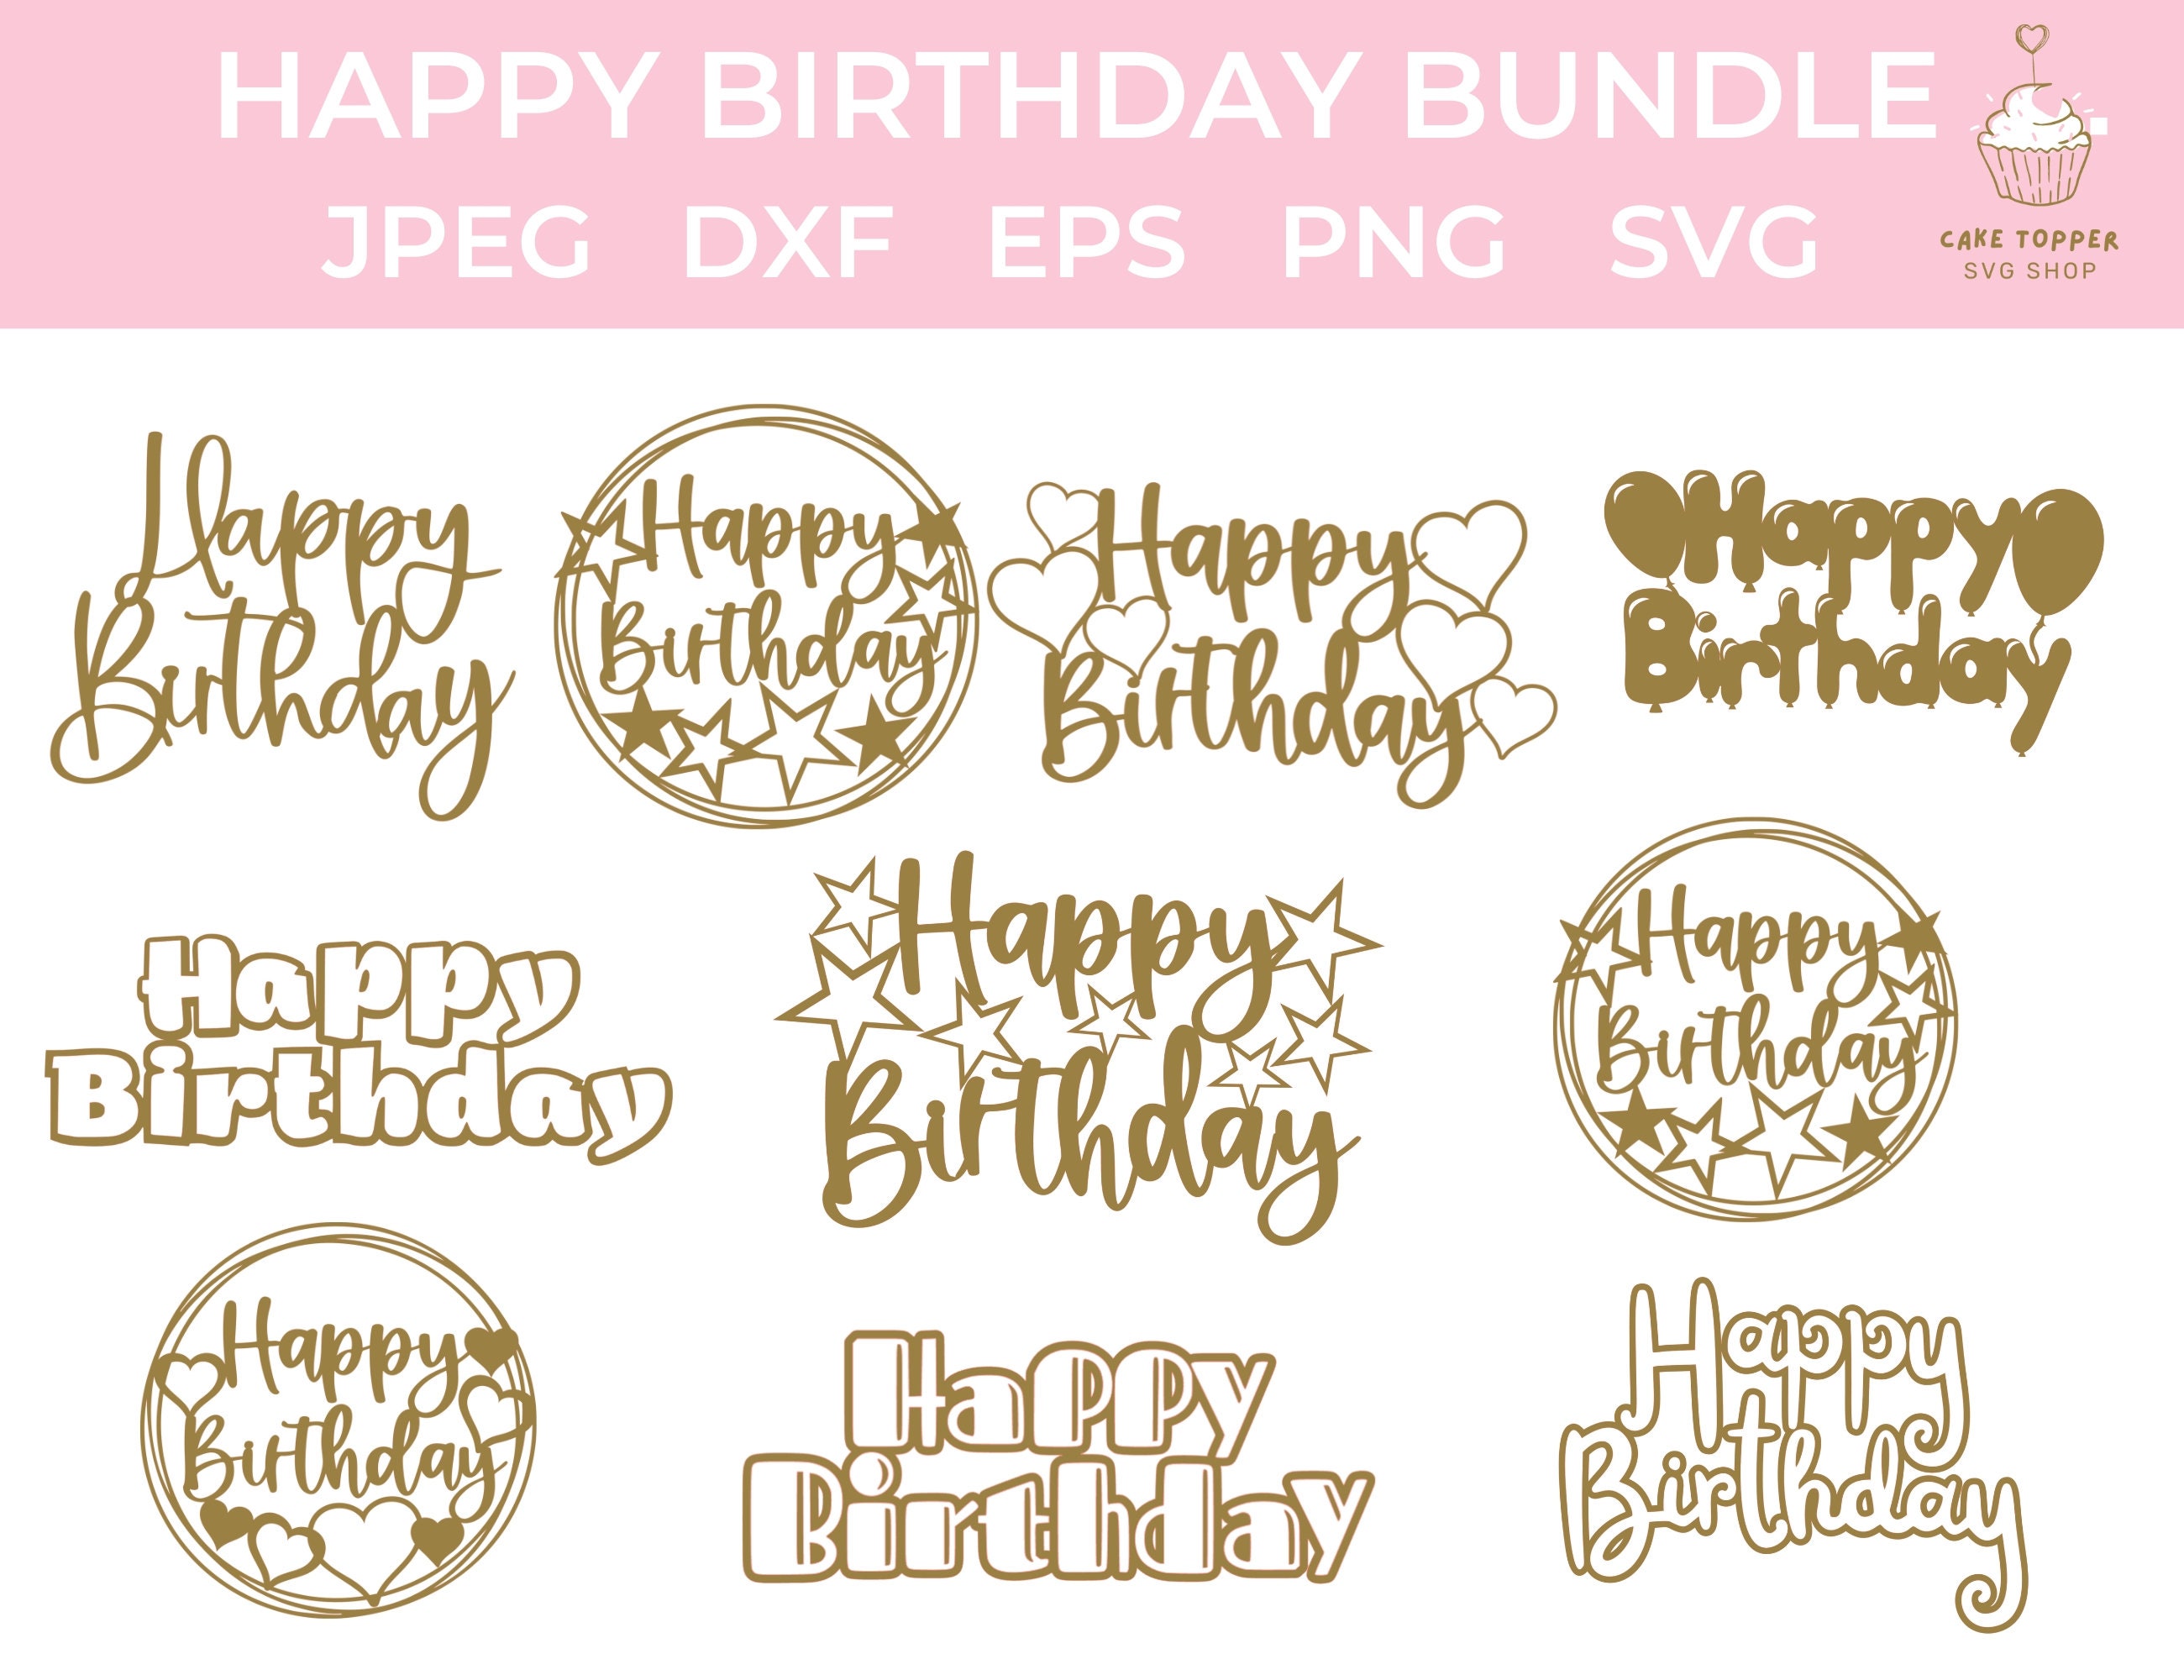 Happy Birthday Cake Topper Svg, Happy Birthday Svg, Cake Topper Svg, Cut  Files for Cricut, Silhouette, Glowforge, Dxf, Png -  Canada